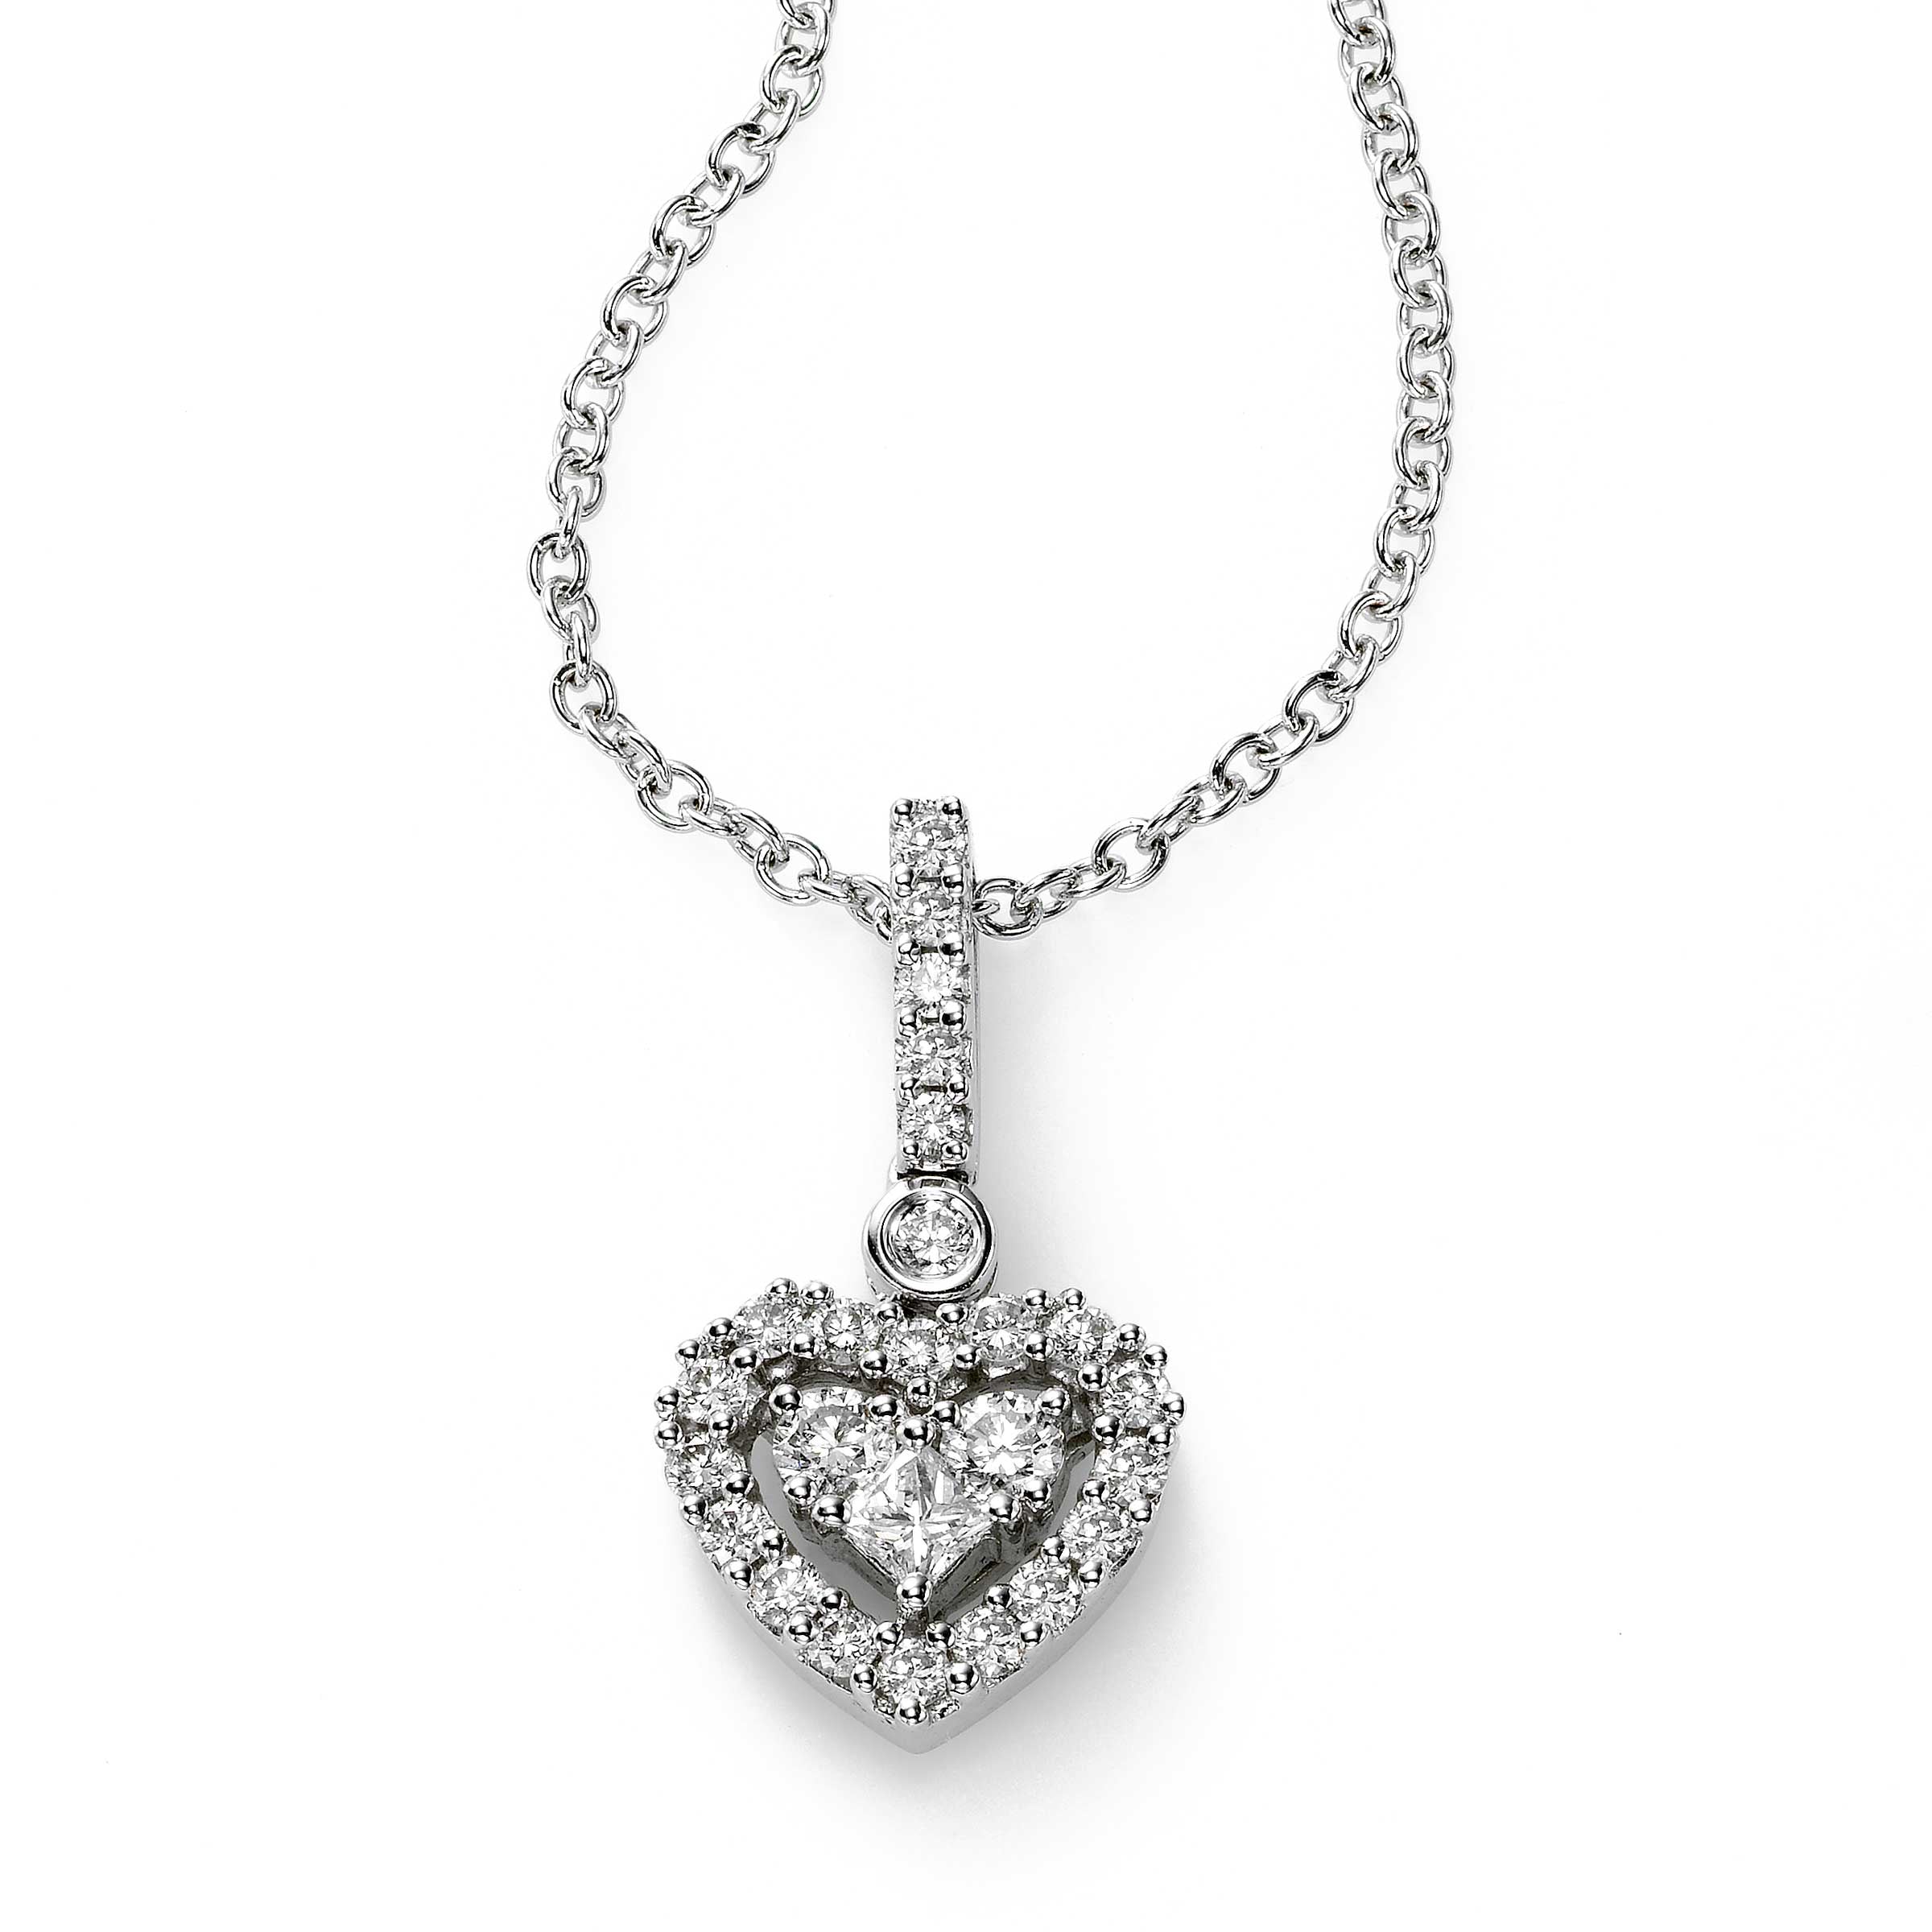 Buy Maverick Double Heart with Diamond Tilted Necklace; Beautiful Chain  Pendant for Girls n Women at Amazon.in